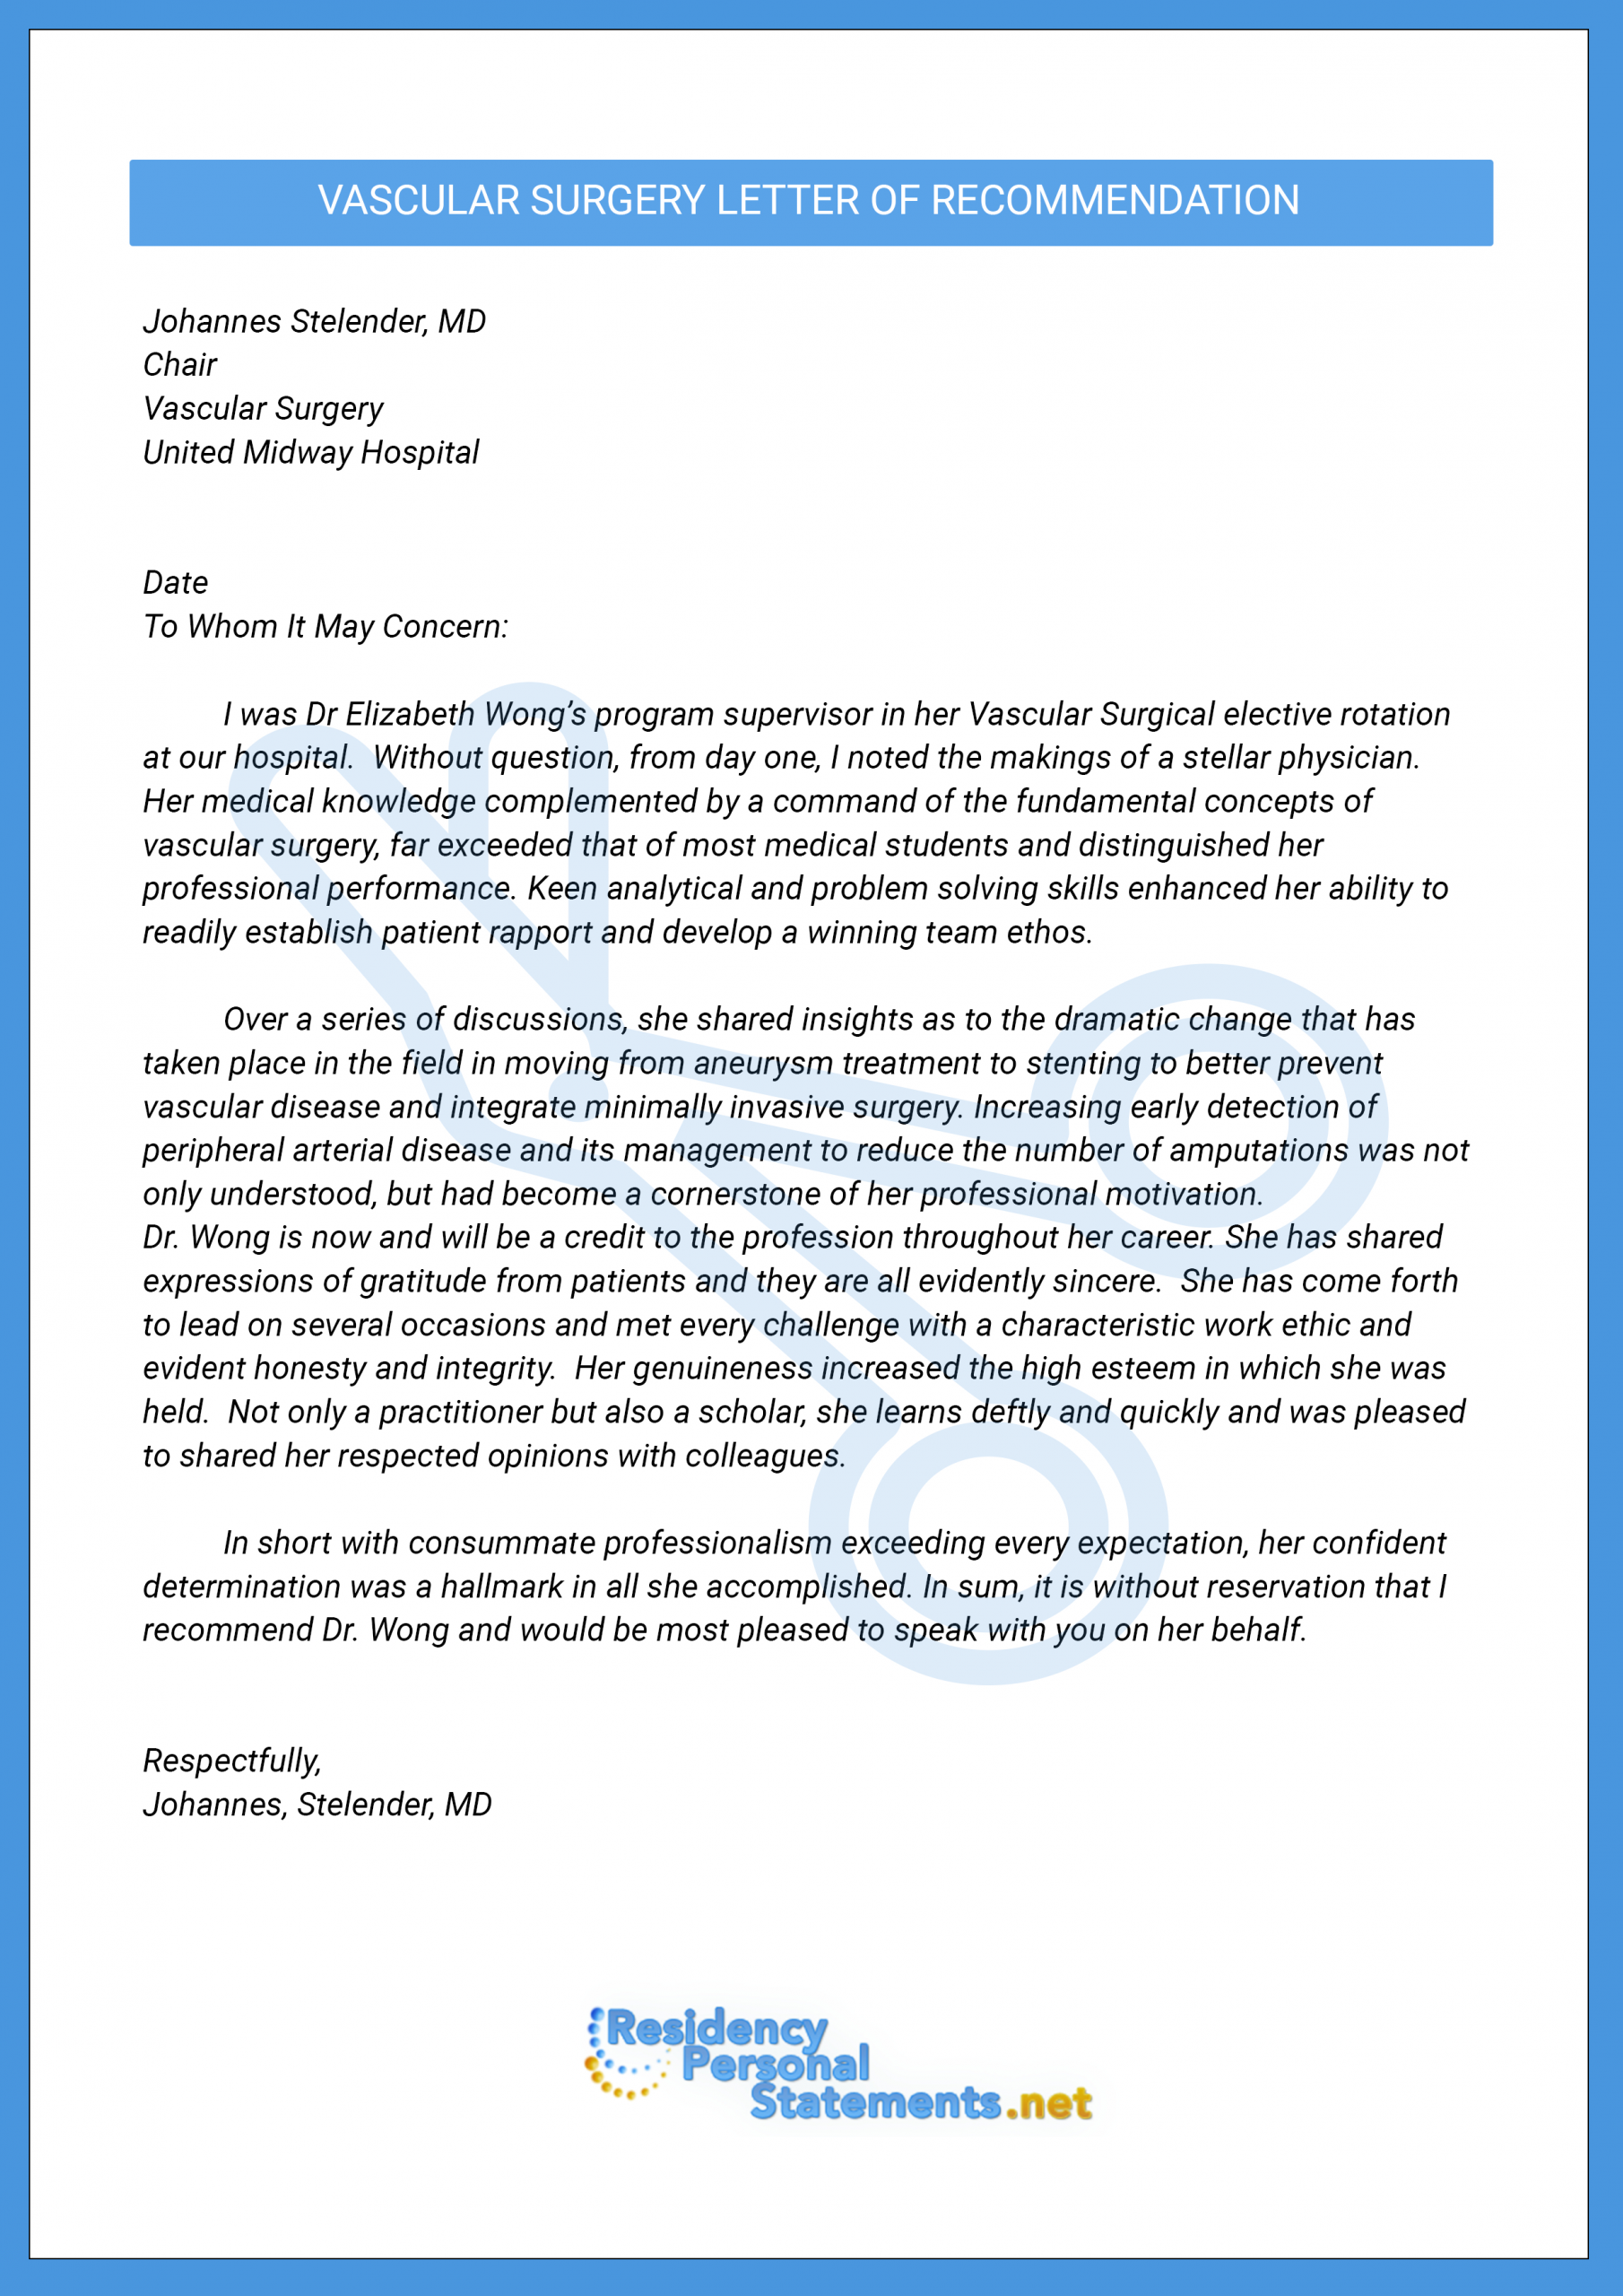 Letter Of Recommendation Residency Cardiology Residency for size 2480 X 3508